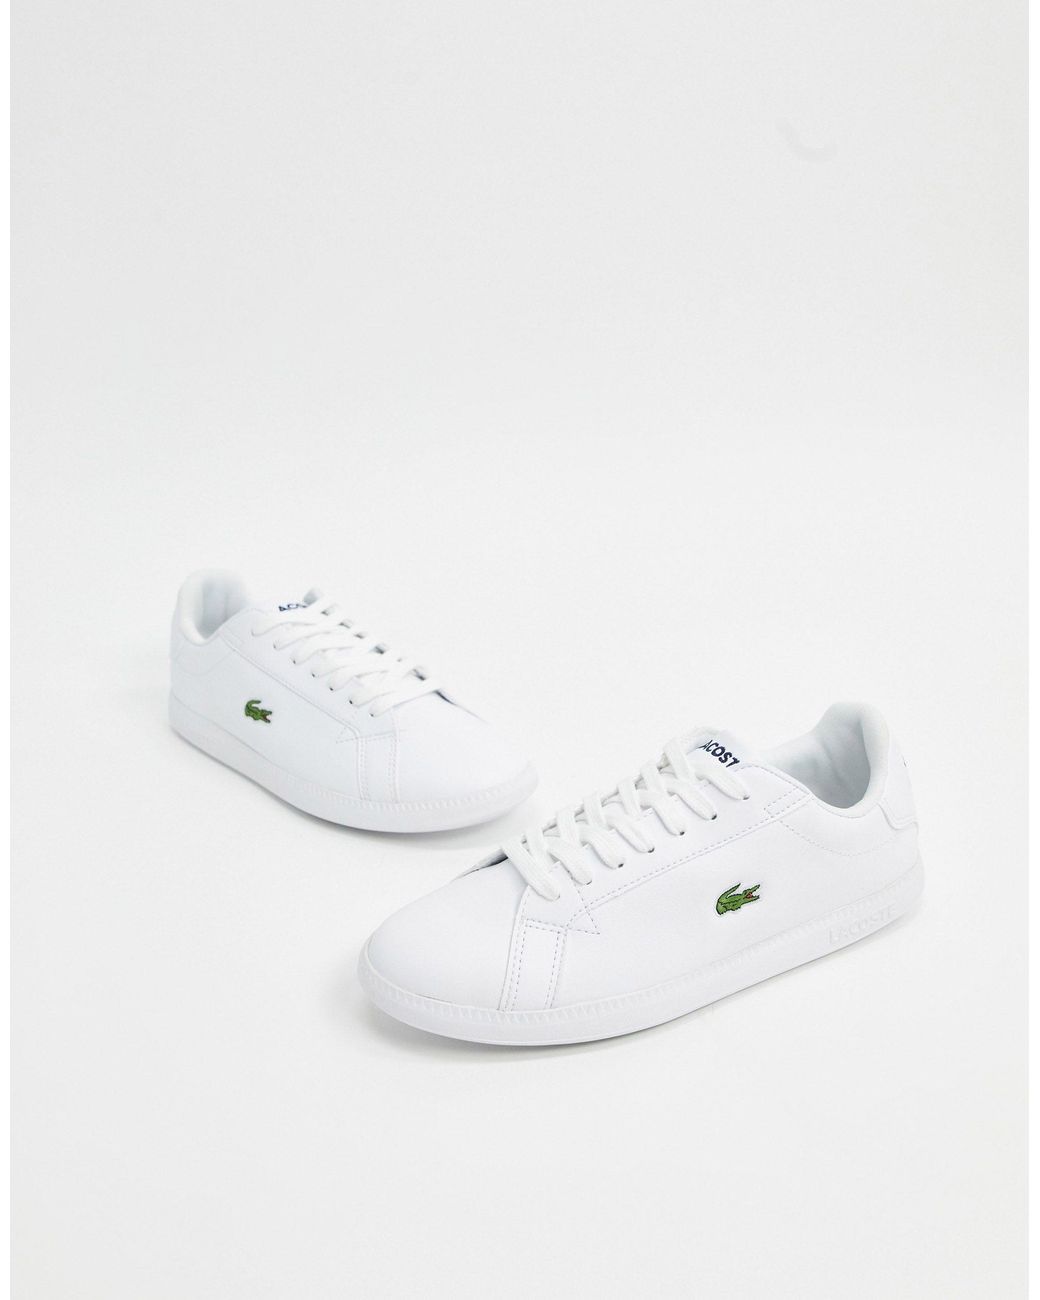 Lacoste Bl 1 Leather Trainers in White | Lyst